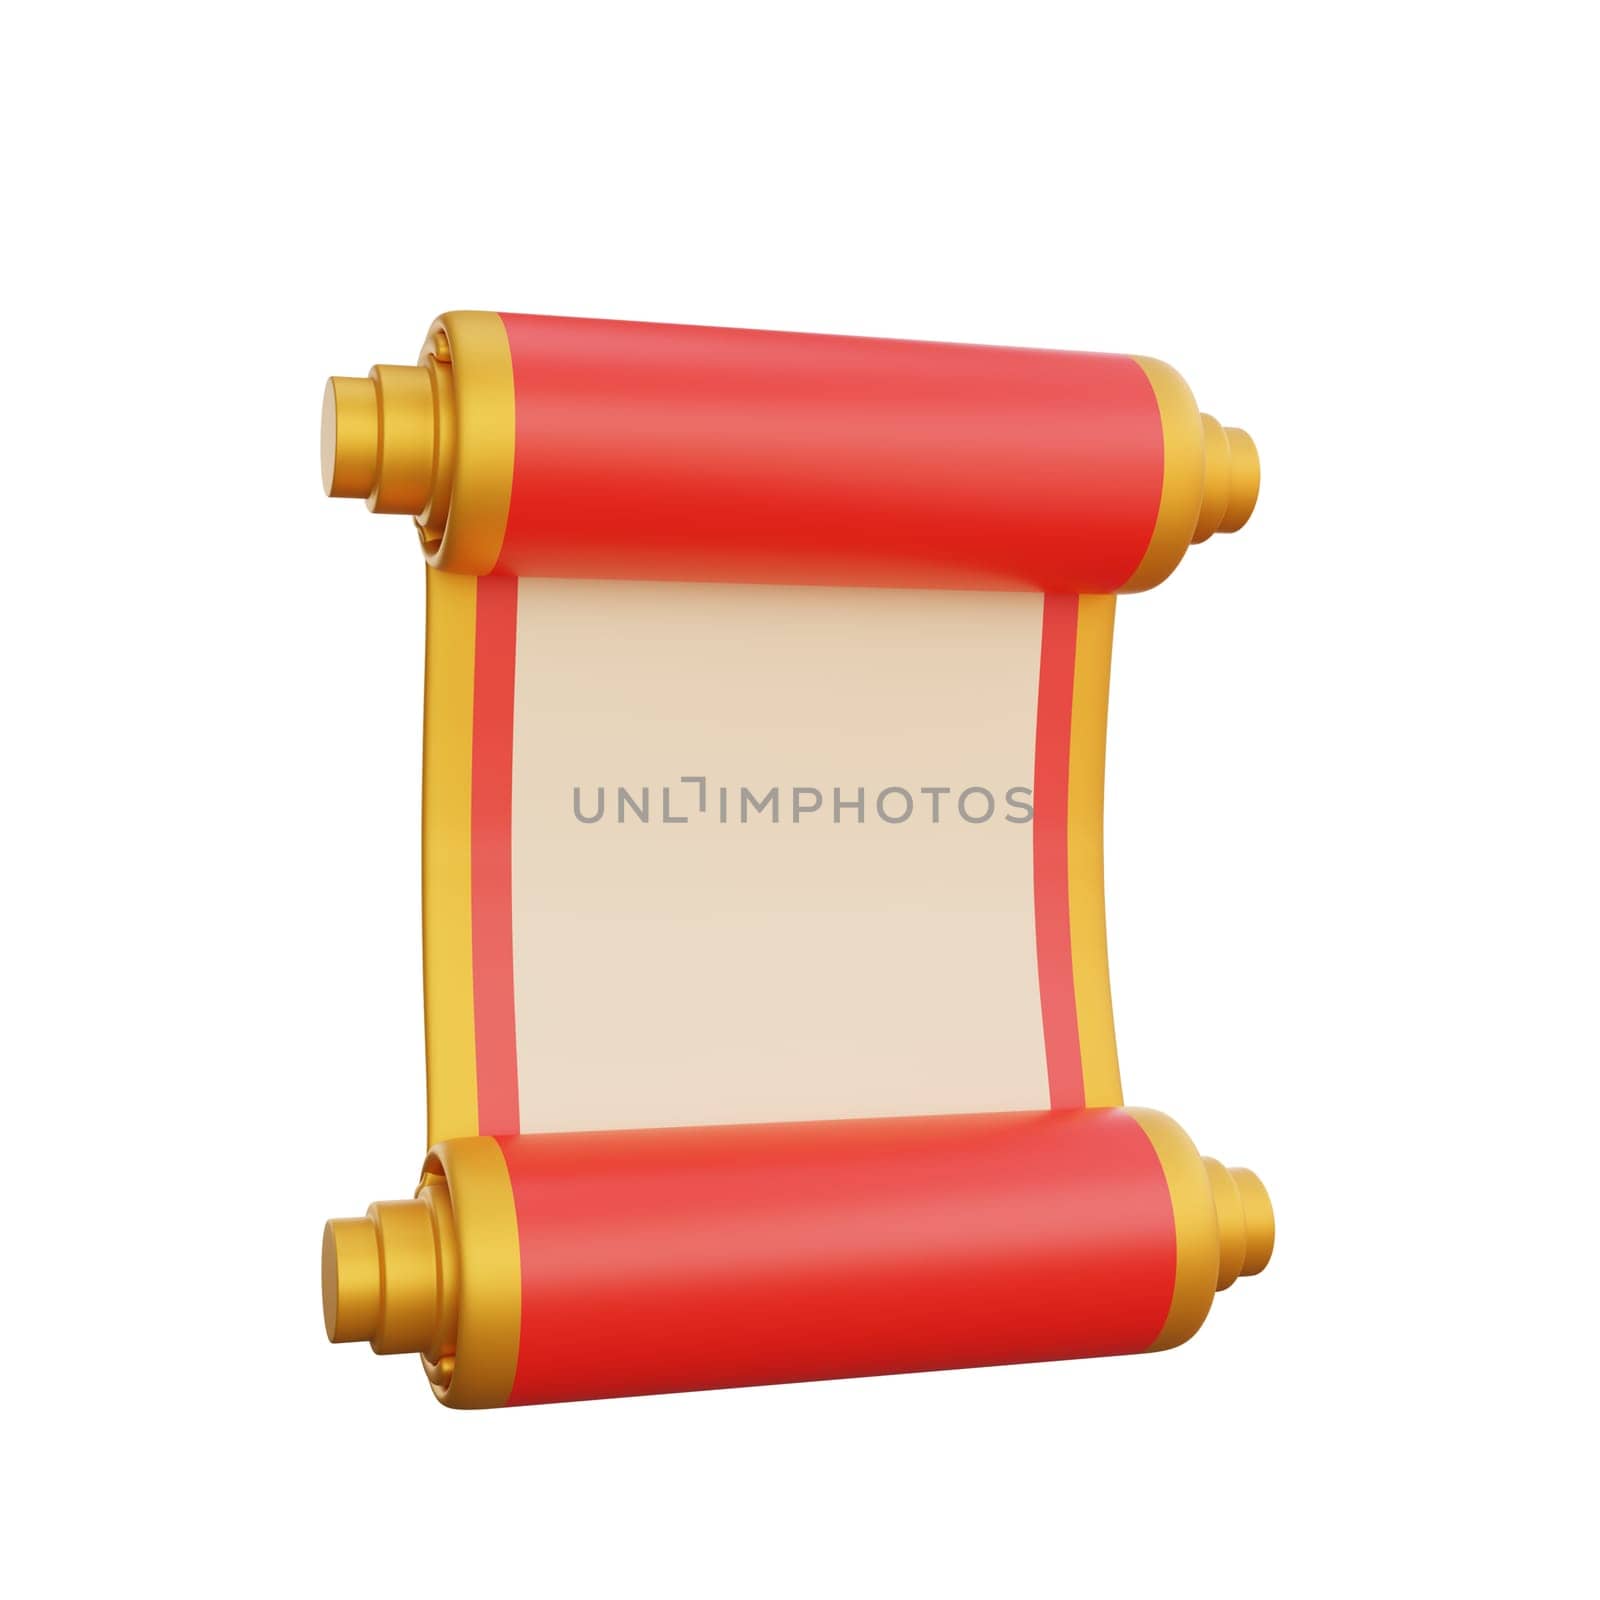 3D illustration of Chinese Scroll Paper icon, perfect for a Chinese New Year theme